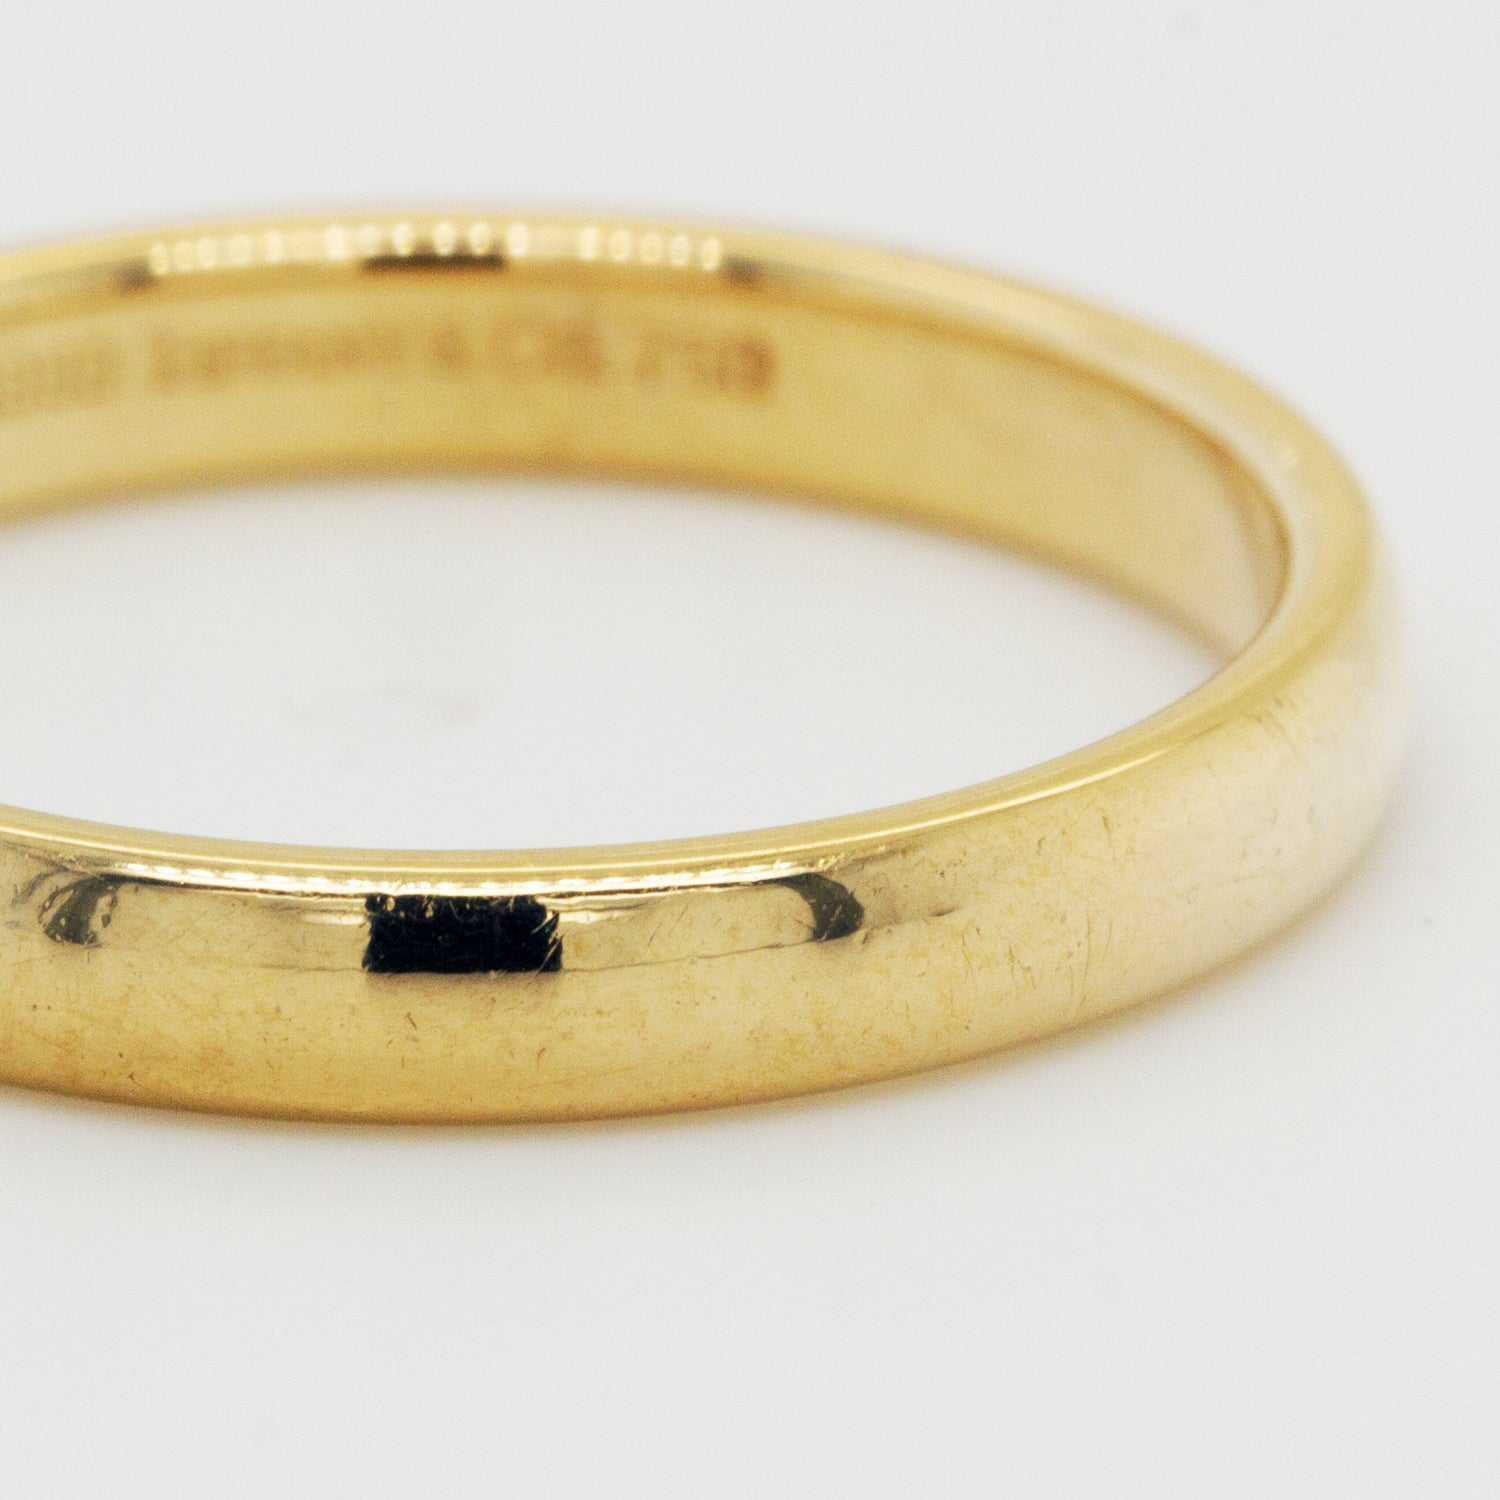 1999 Tiffany & Co. 3mm Wedding Band in 18K Yellow Gold